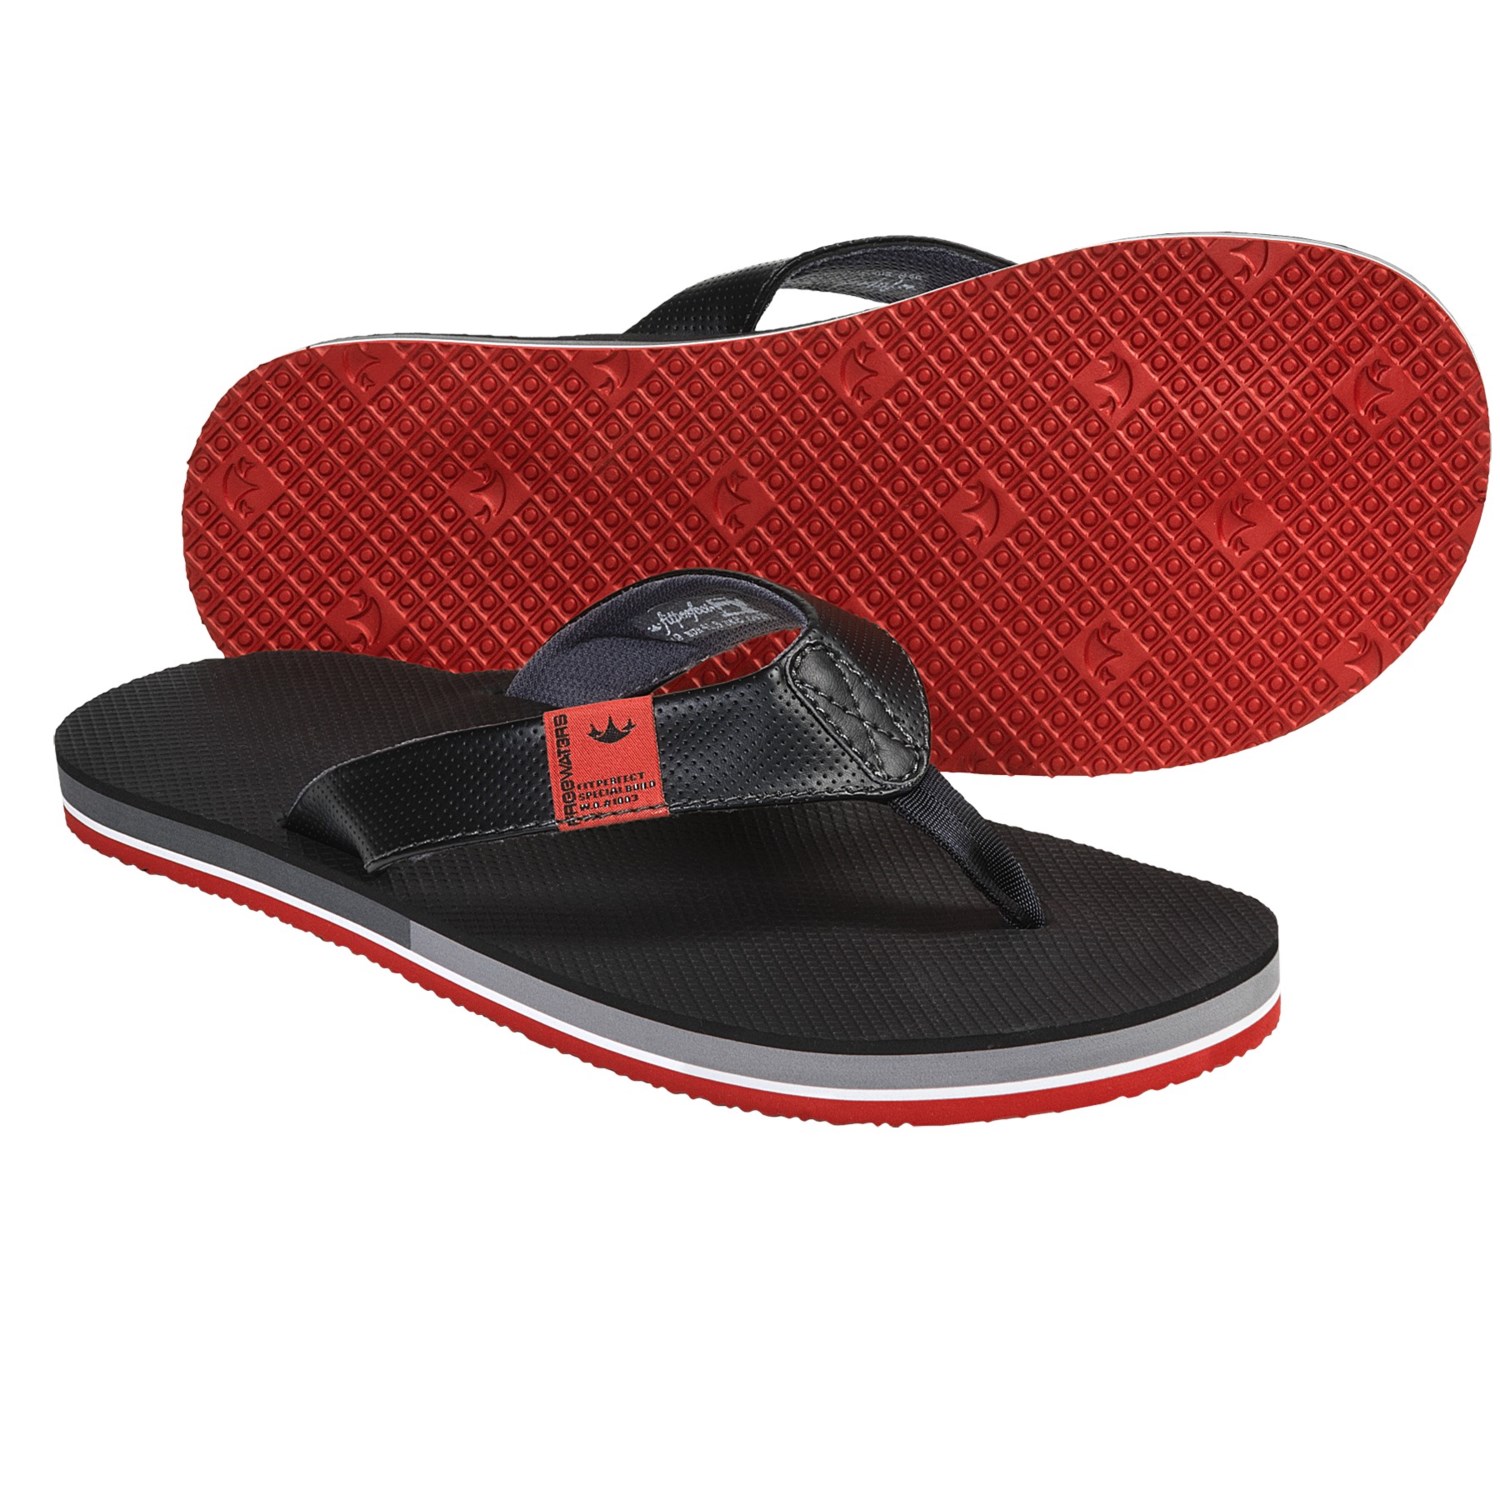 Freewaters The Dude Sandals (For Men) 5185N - Save 60%